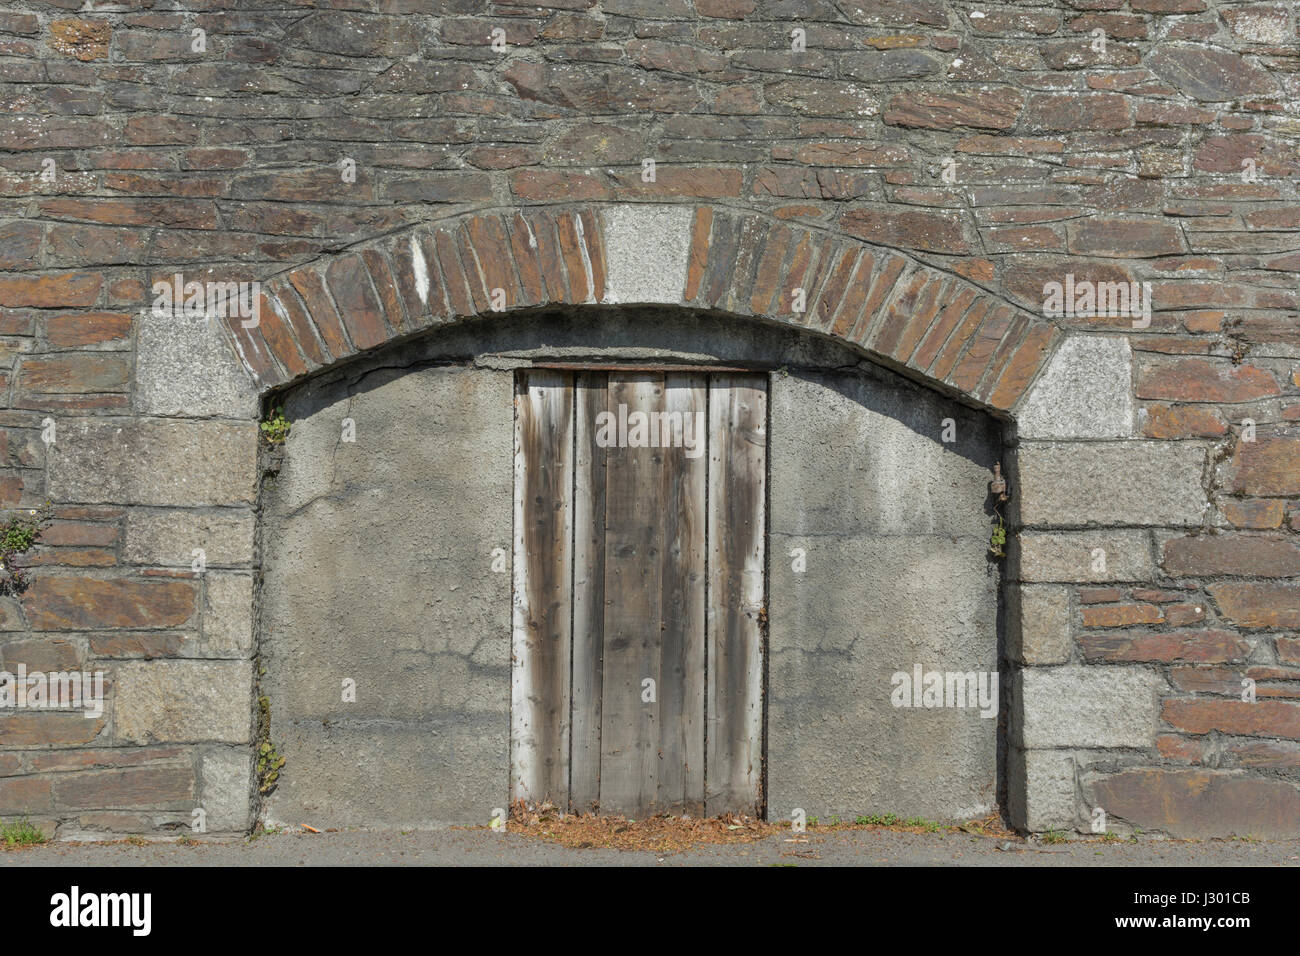 Blocked doorway in arched edifice - possible metaphor for 'barring', blocking, and so on. Stock Photo